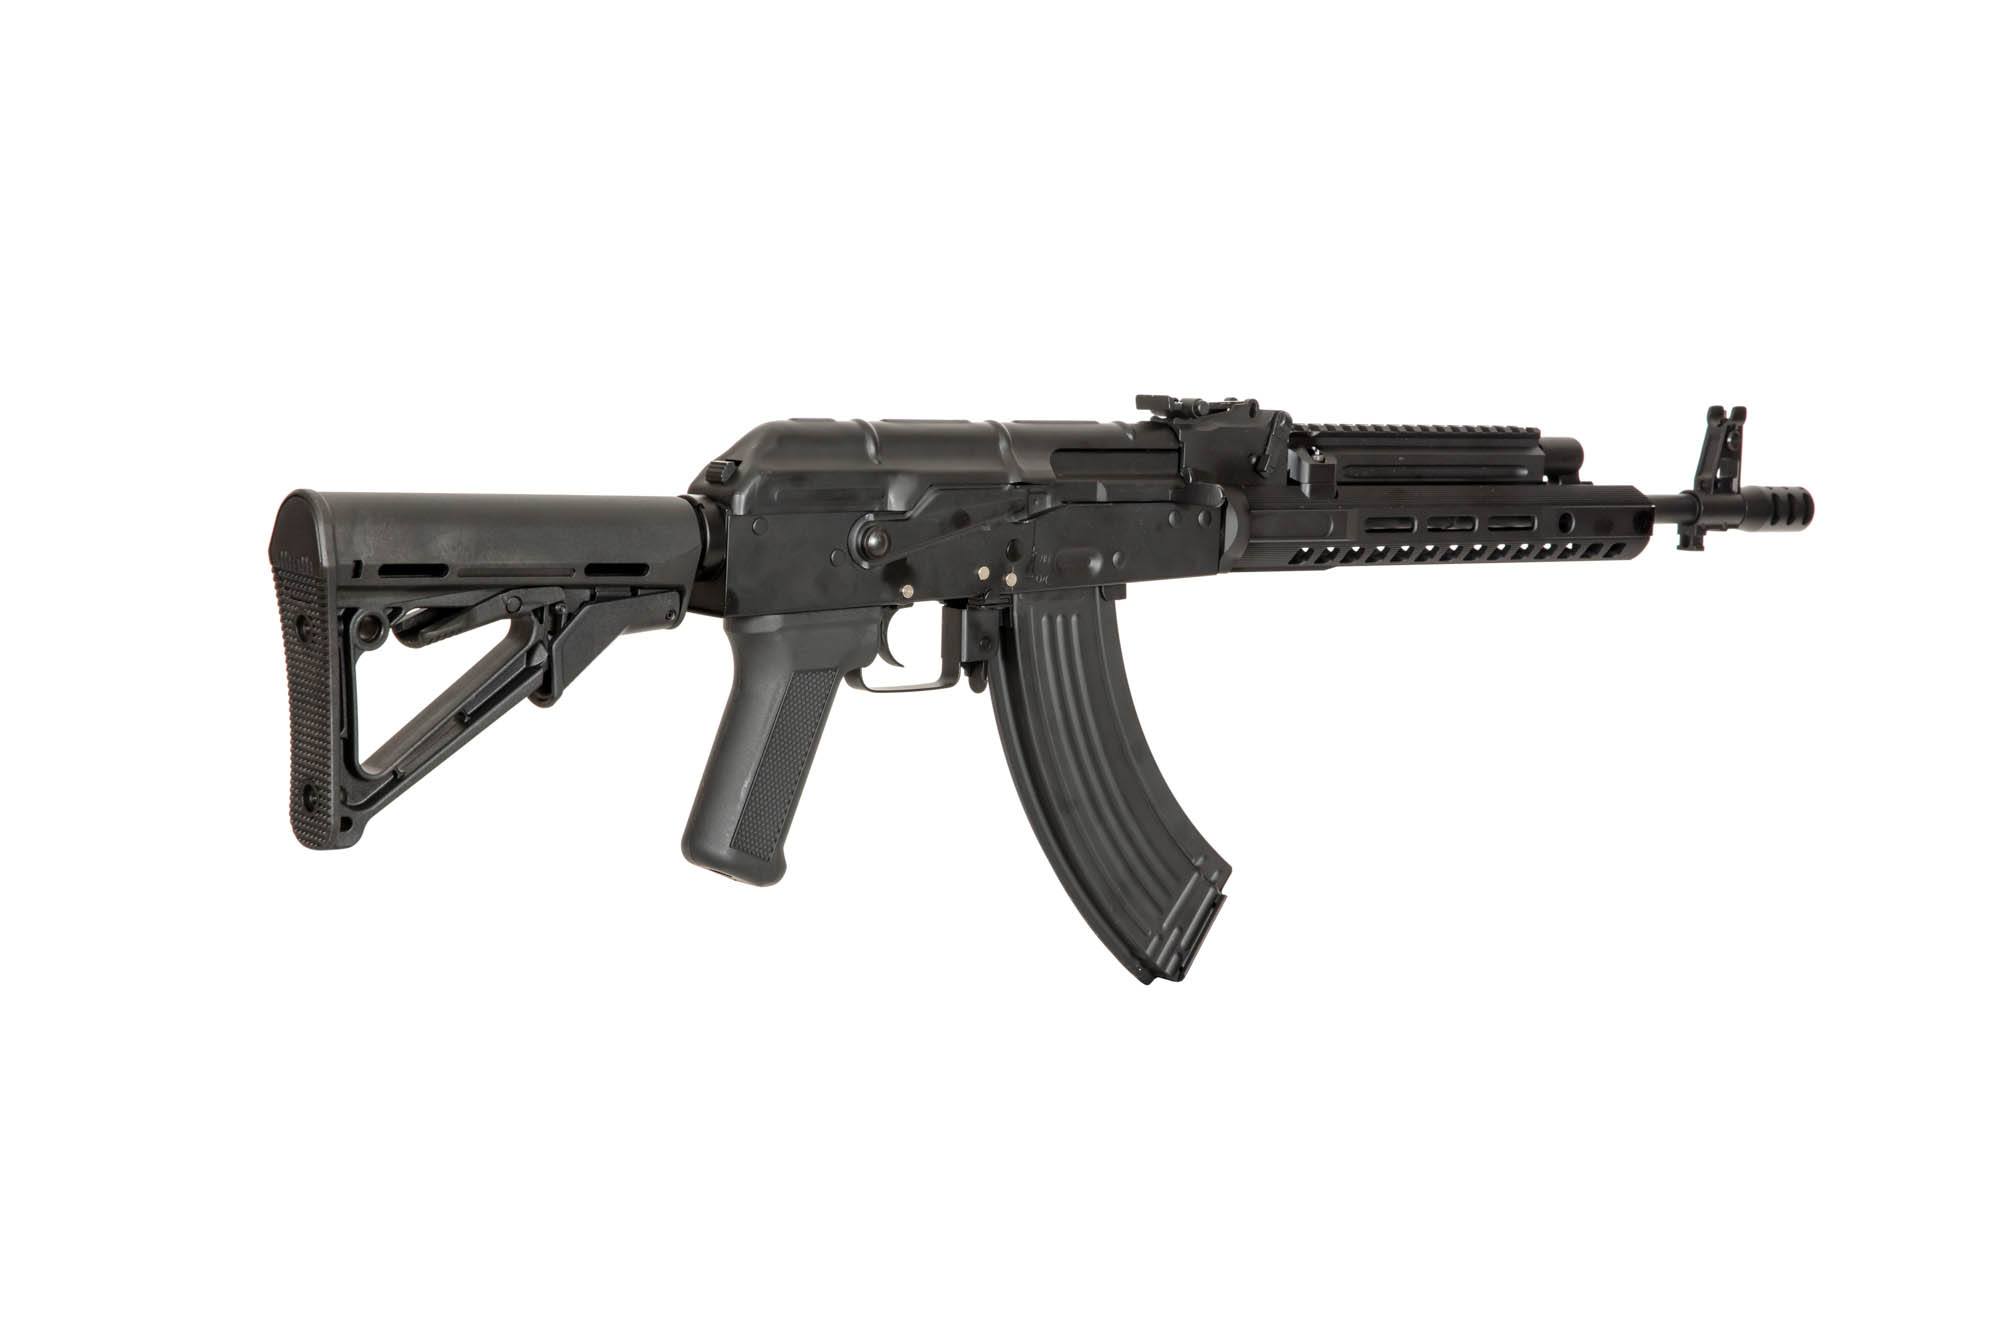 021 Assault Rifle Replica by DBOY on Airsoft Mania Europe